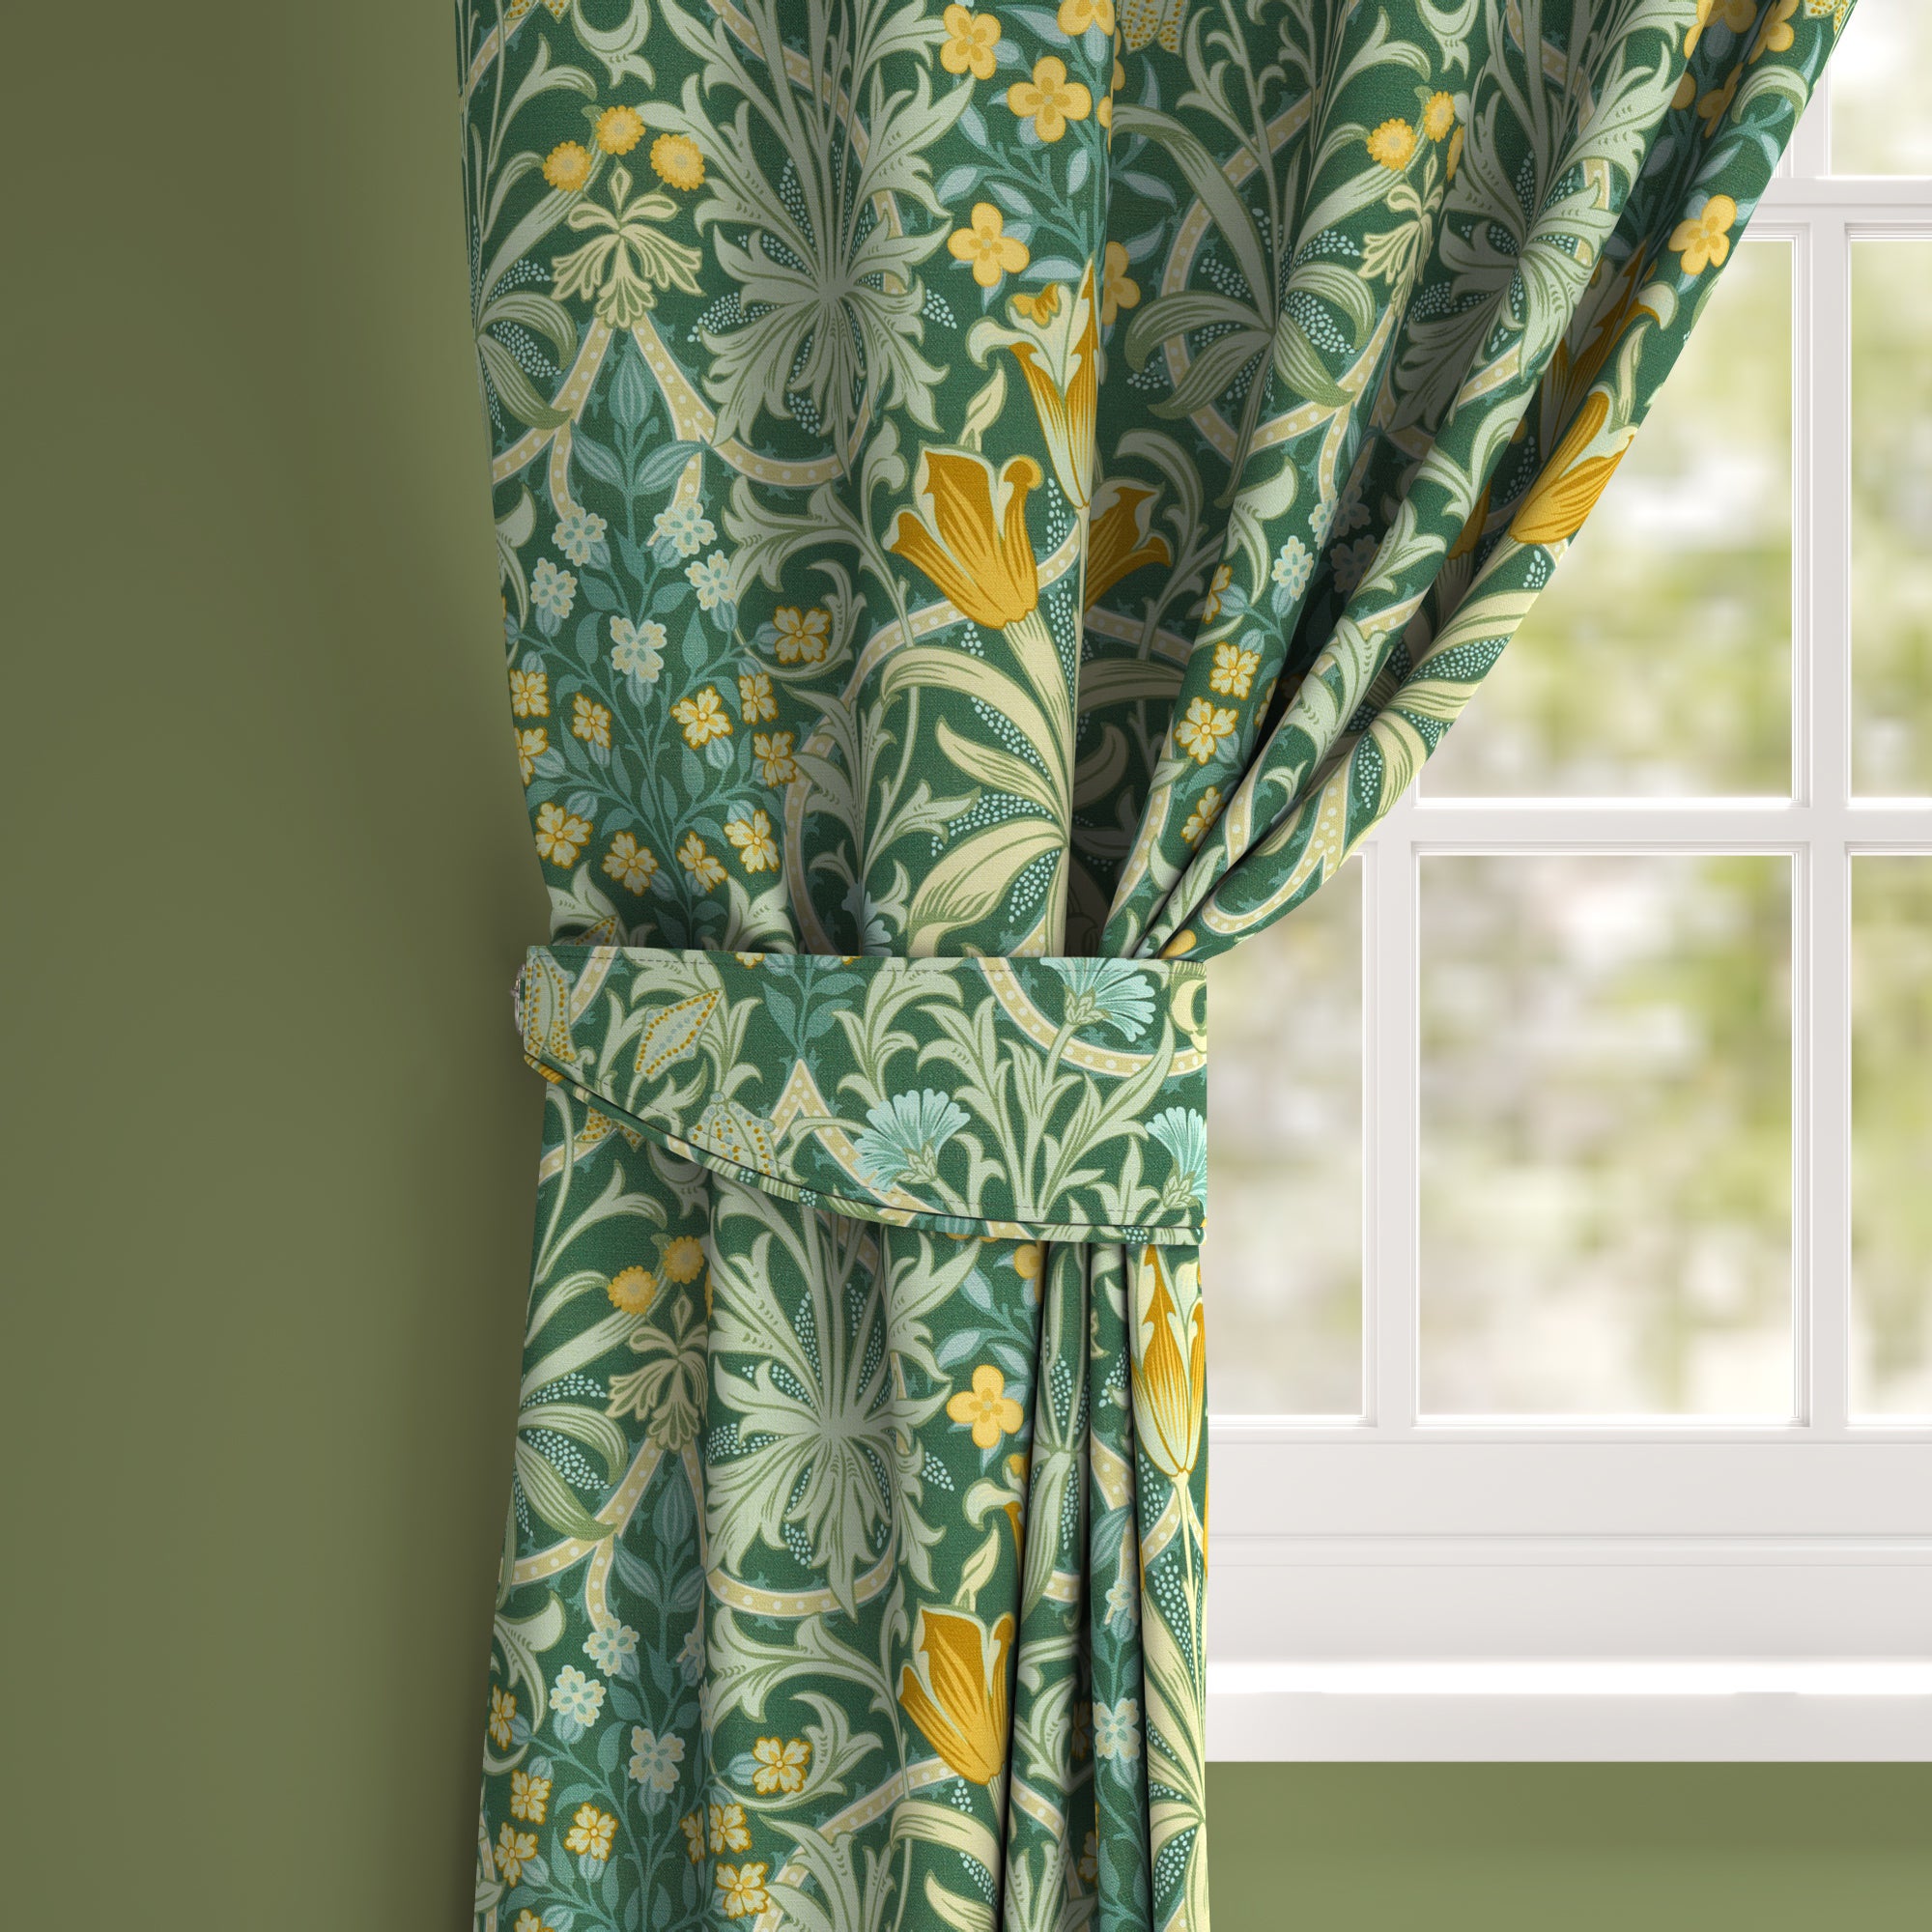 William Morris At Home Woodland Weeds Made To Measure Fabric Sample Woodland Weeds Evergreen